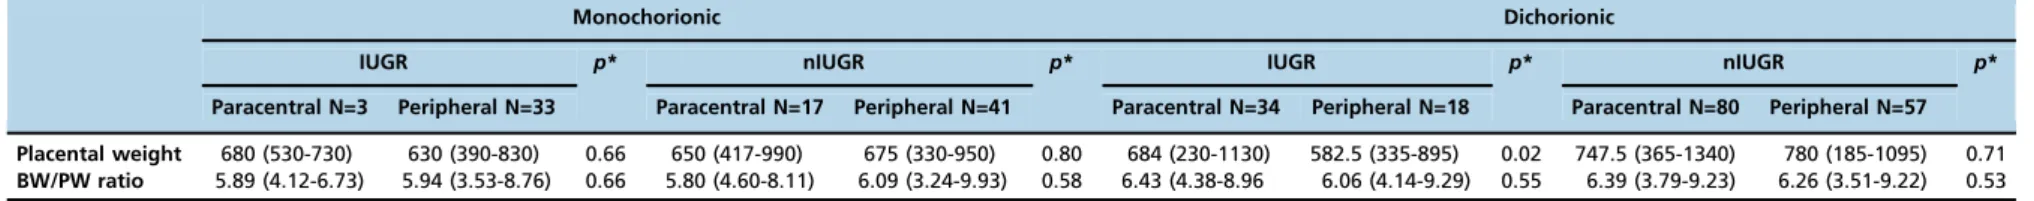 Table 5 - Comparison of placental lesions according to chorionicity and intrauterine growth restriction (IUGR) or non-IUGR (nIUGR).